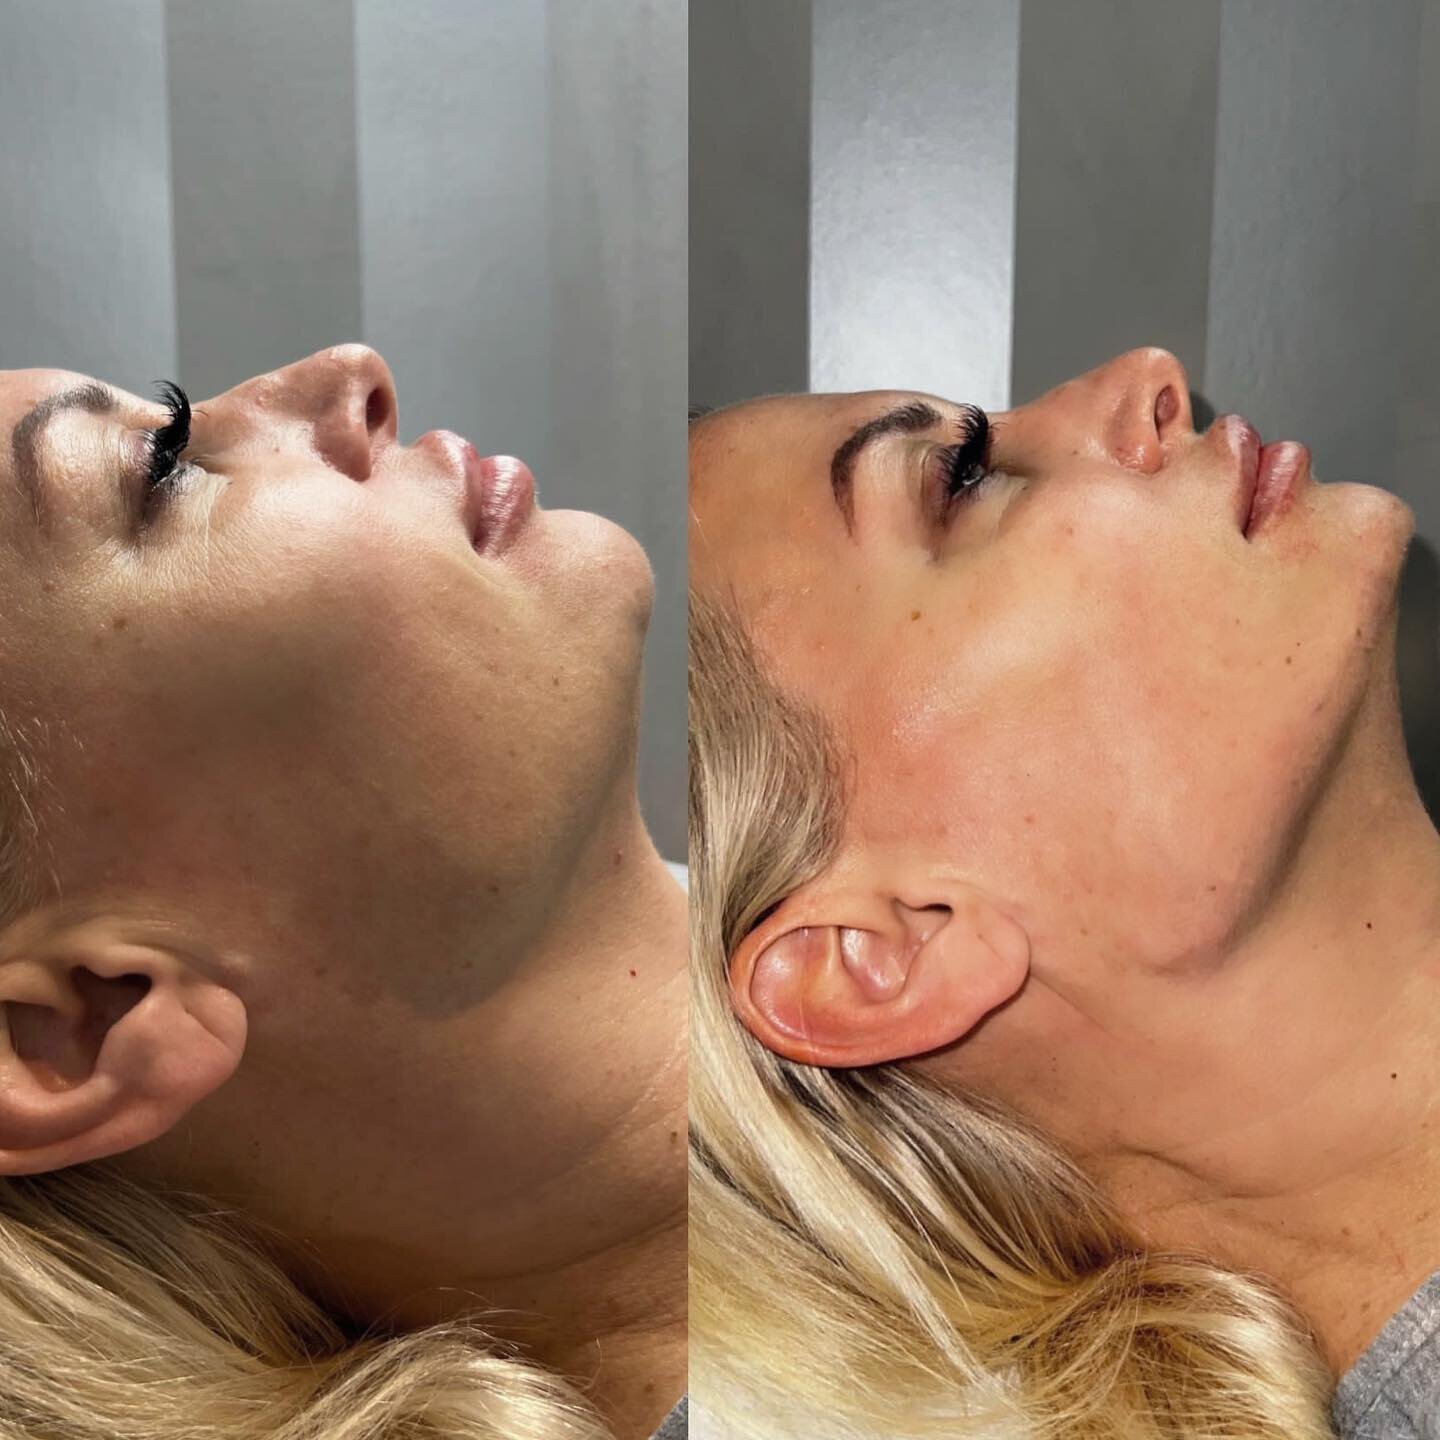 Imagine going into the weekend with a brand new sharp side profile like this 😍📐 

Another facial contouring result by Amrit 💉 

💻 Book Jawline or Cheek Contouring with dermal filler at our Essex or London clinic 

📲 BOOK at The London Aesthetics